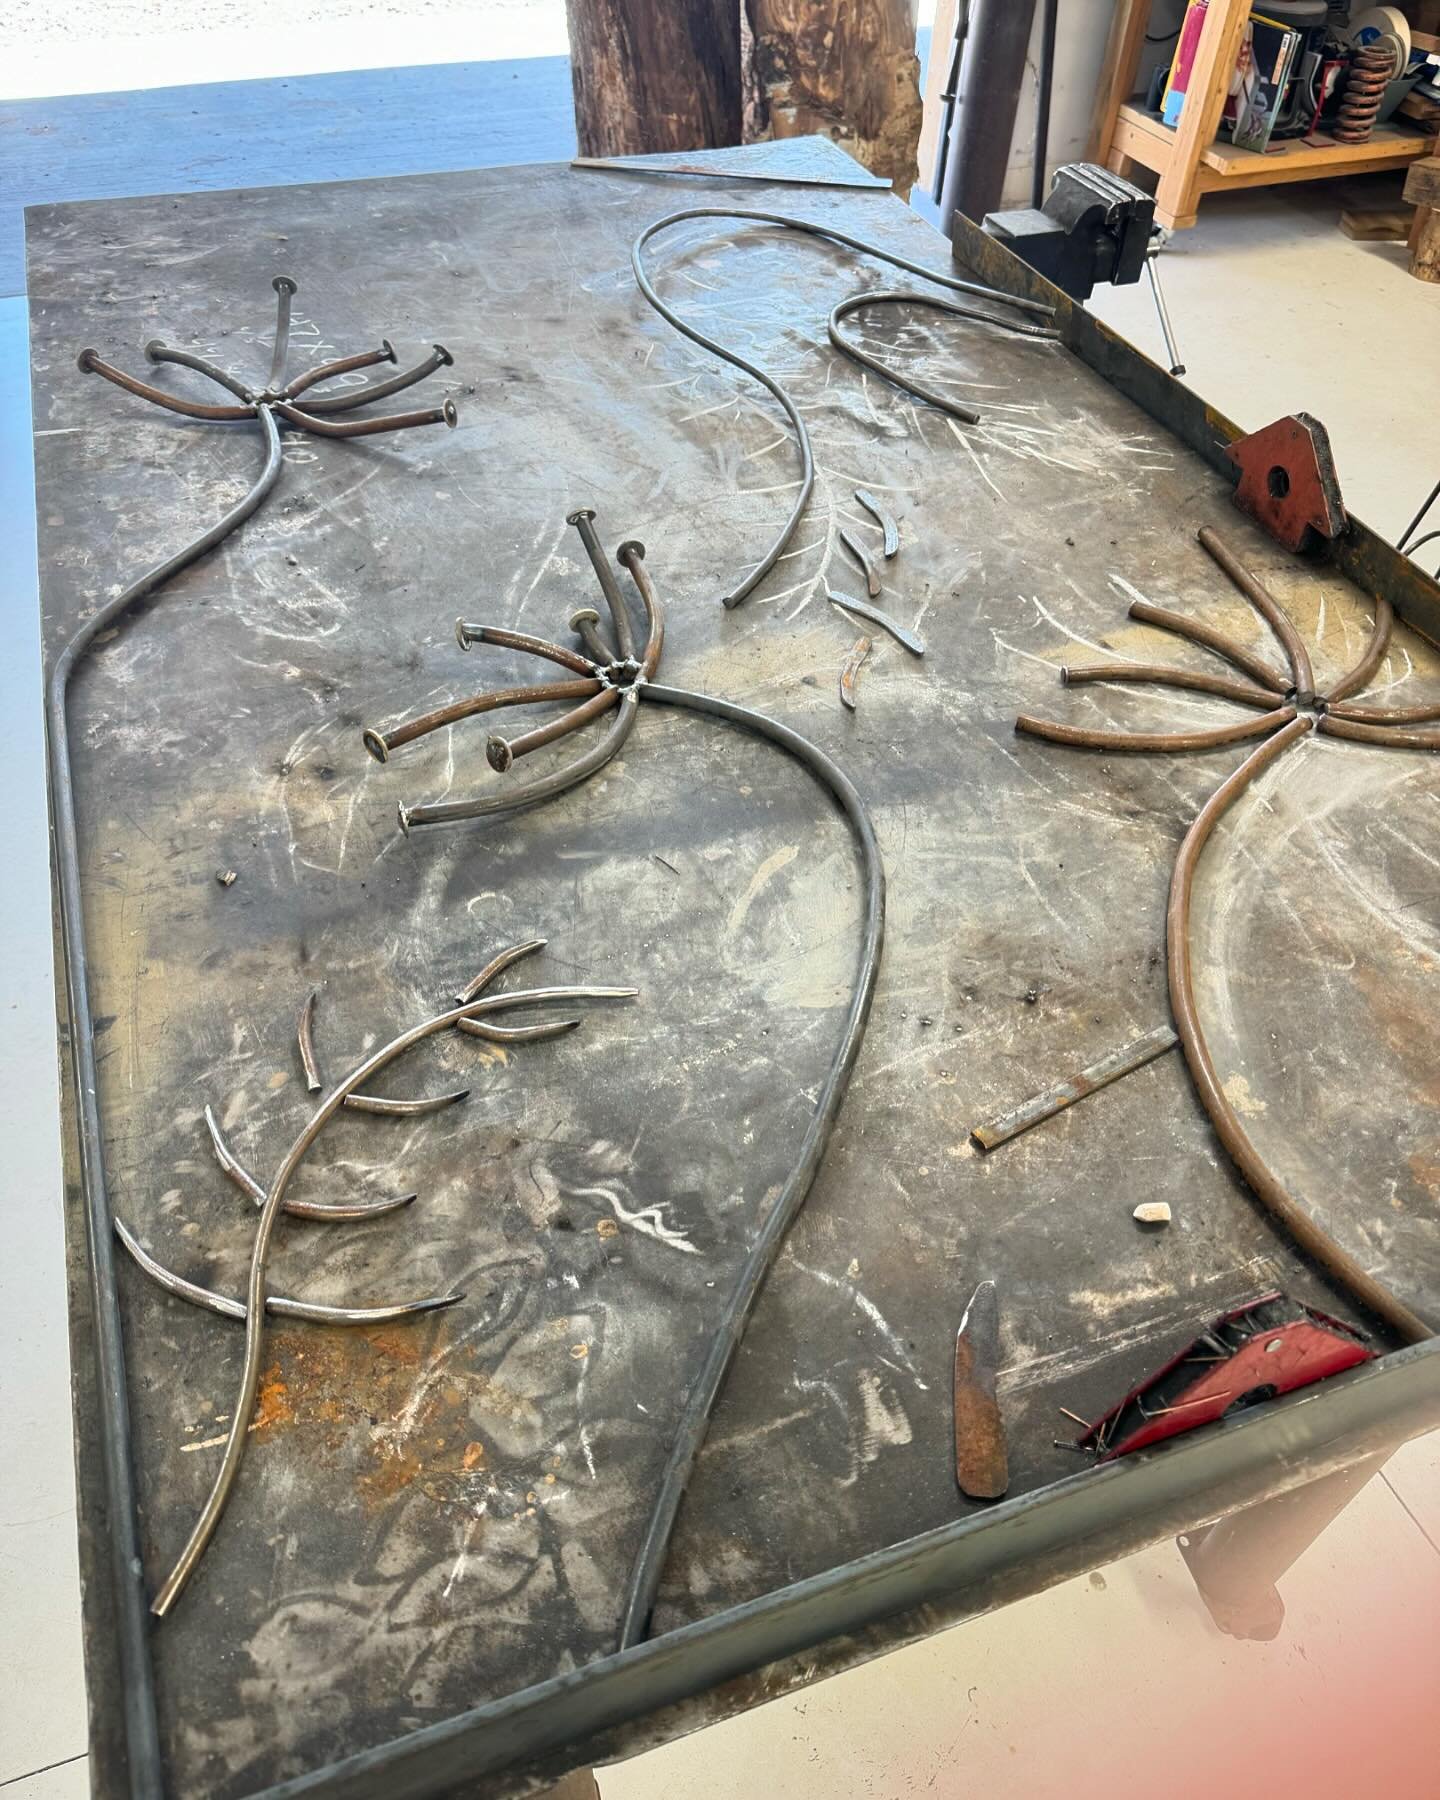 Laying out another gate. I will be a leaf maker for the next few days 🍃🍃🍃😁
.
.
.
#gardengates #artgates #metalgates
#girlsthatweld
#weldingwomen
#metalsculpture
#andreawendel 
#andileaspen